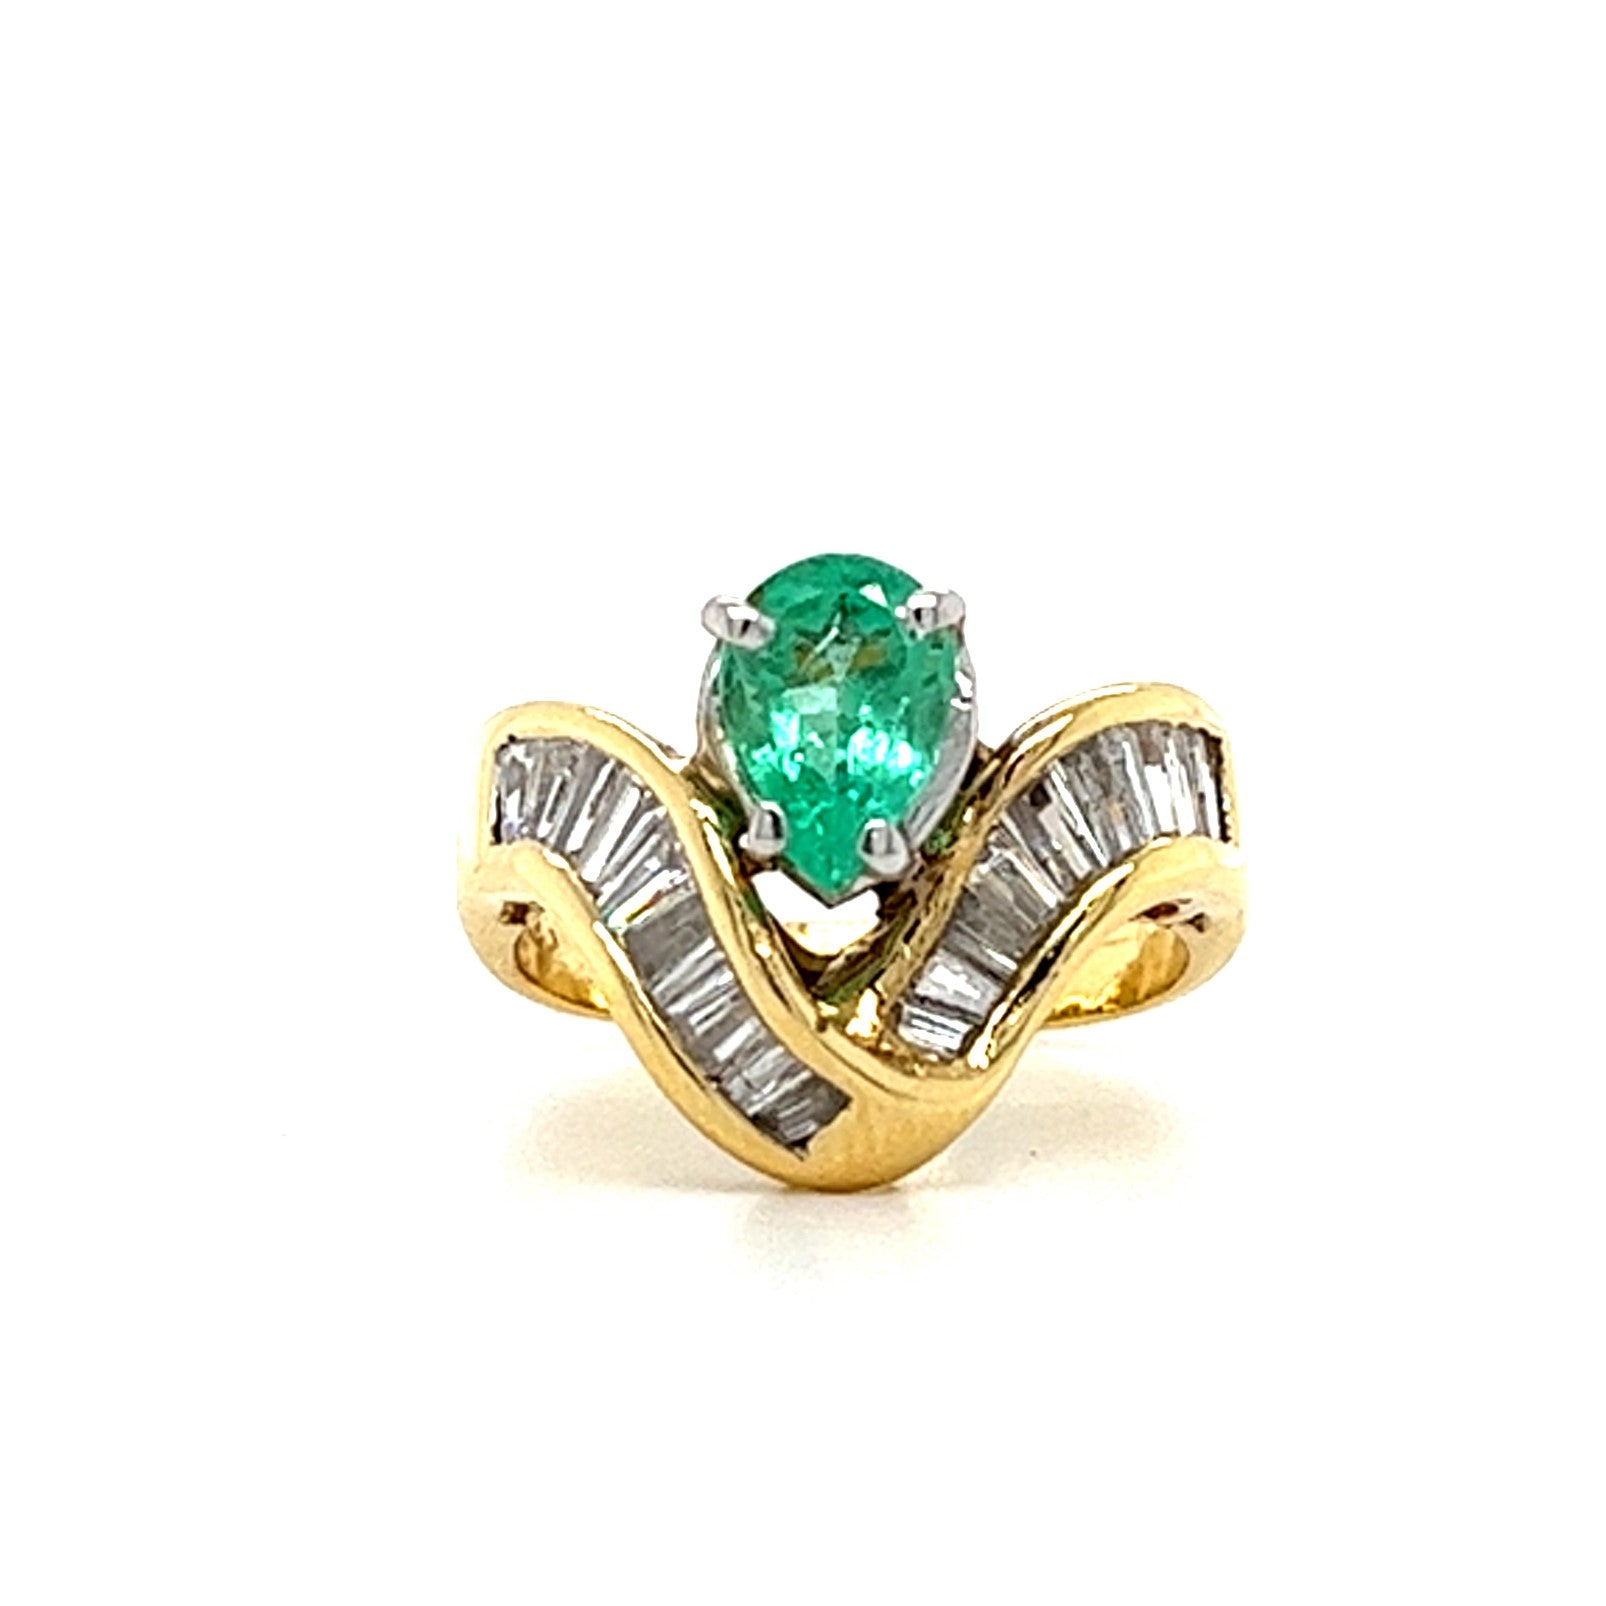 18KT YELLOW GOLD EMERALD AND DIAMONDS LADIES RING